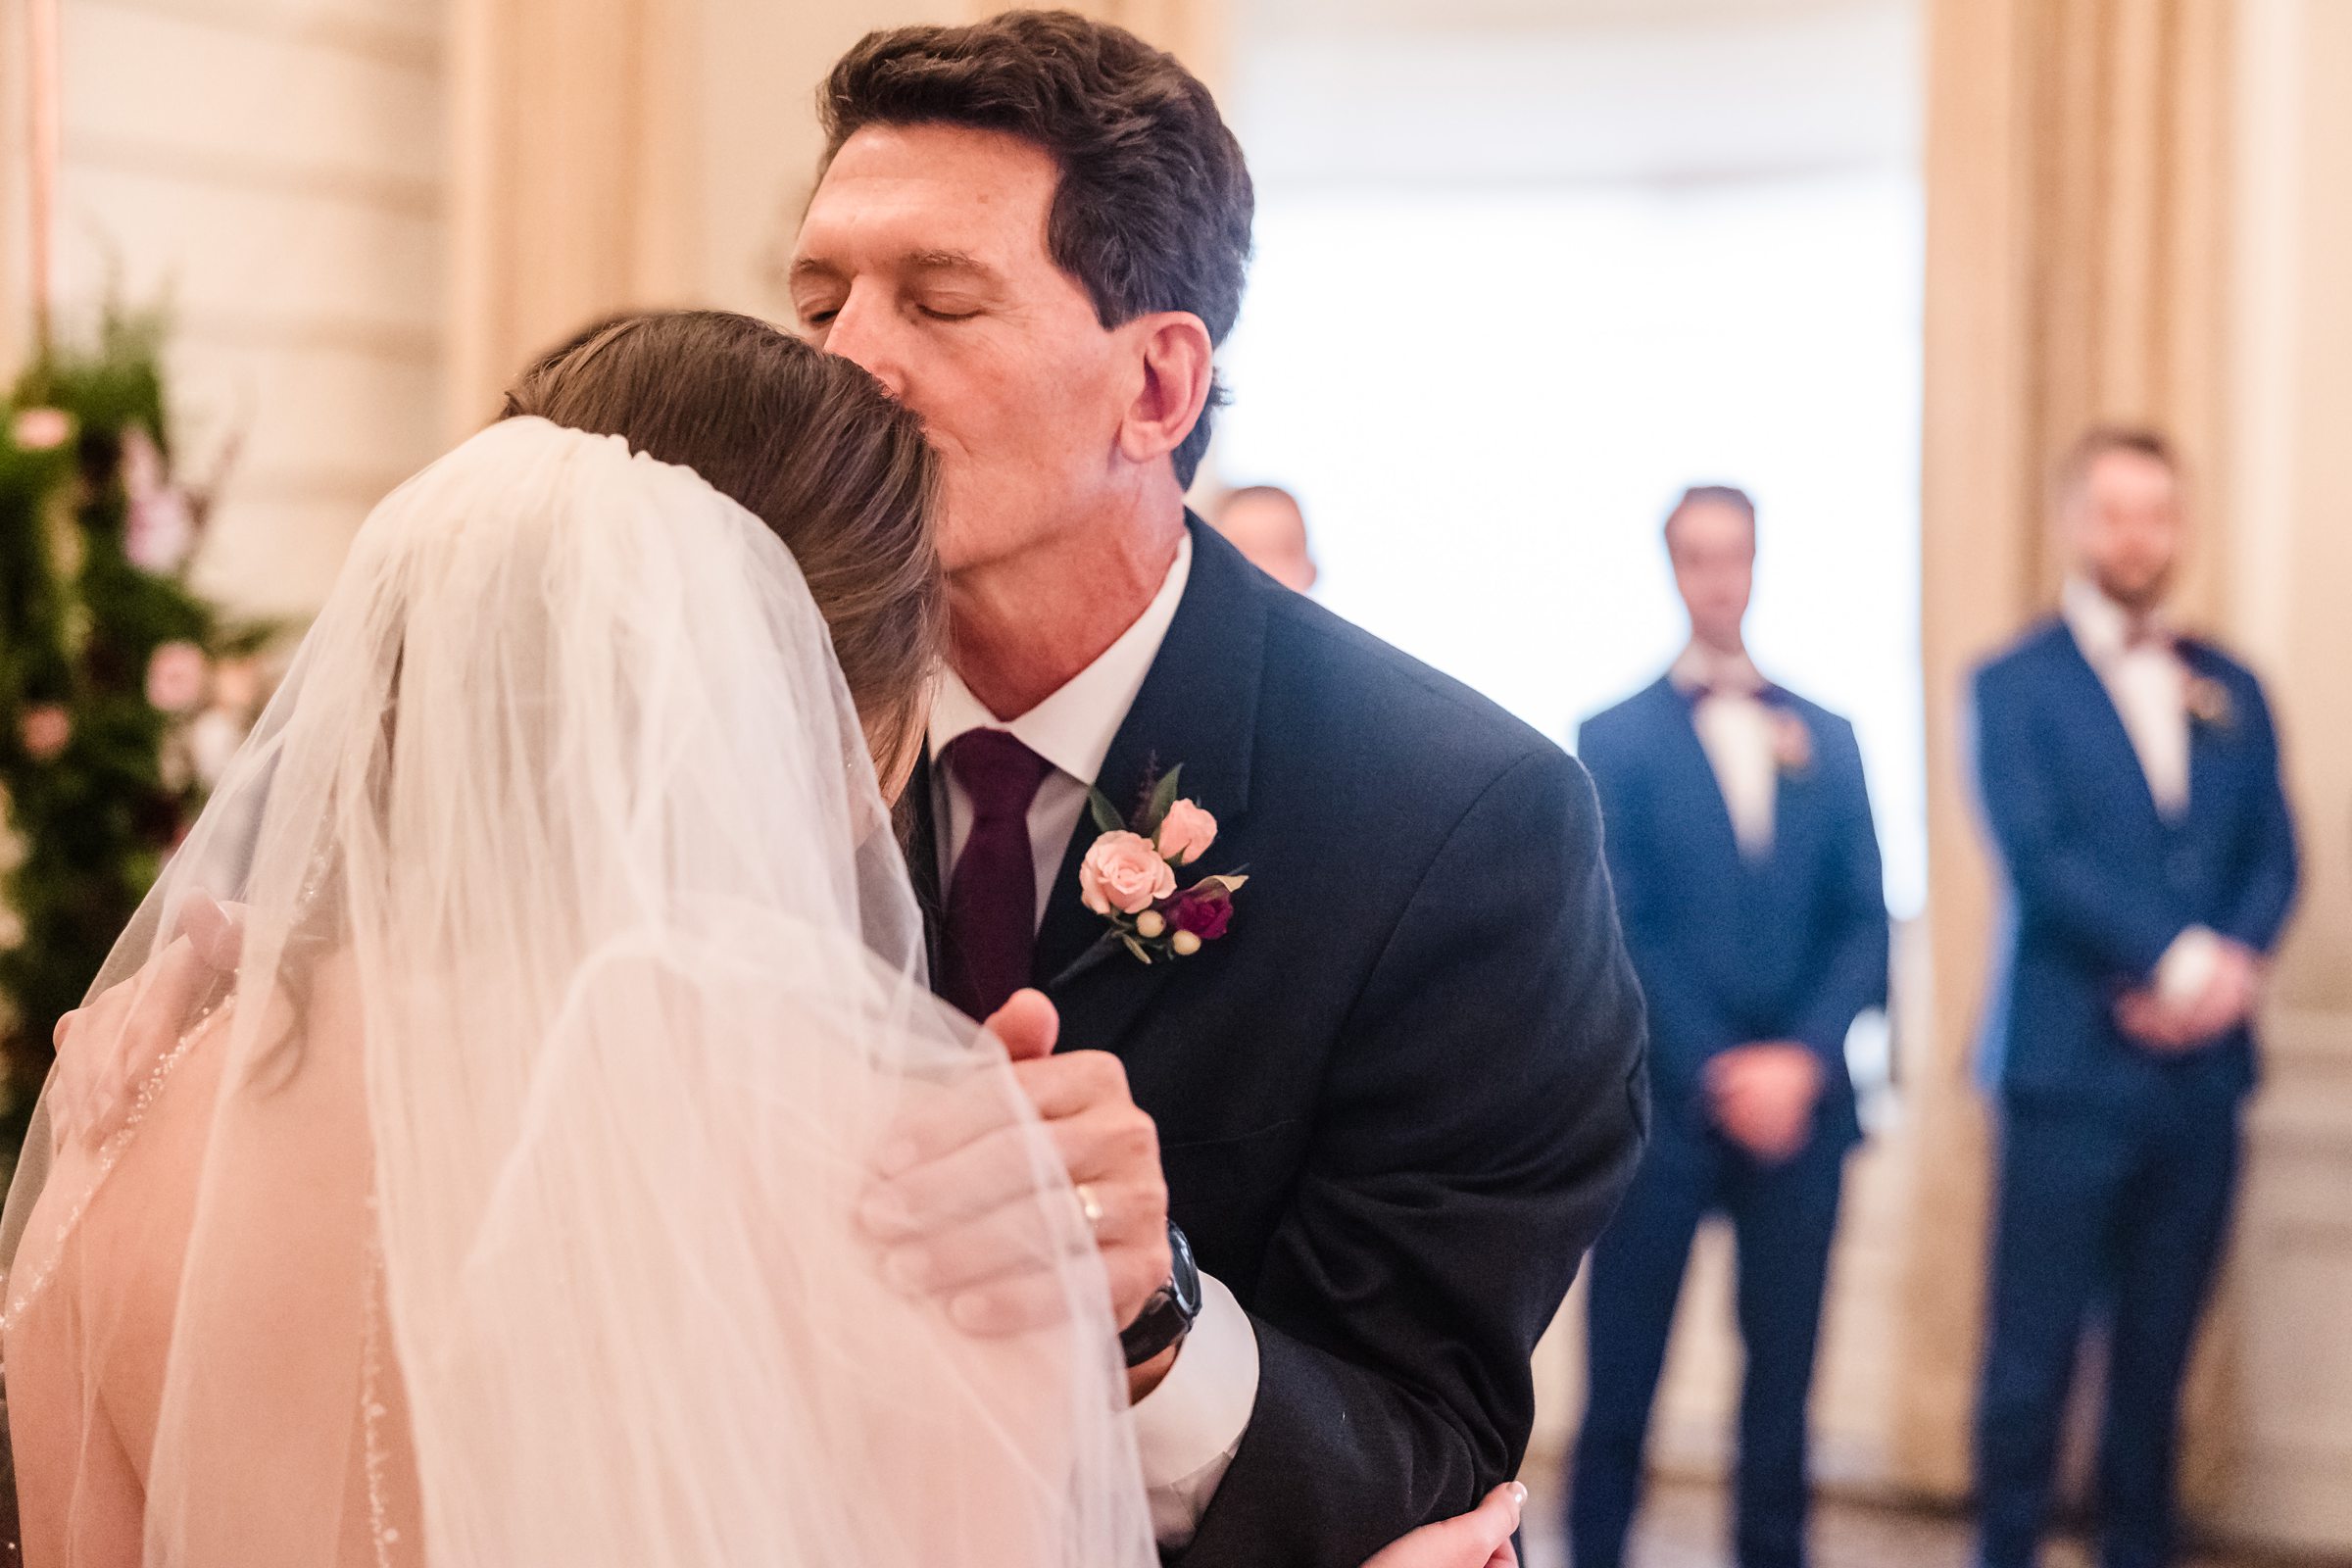 Father kisses his daughter on the forehead during her wedding at the Hotel Pere Marquette in Peoria, Illinois.